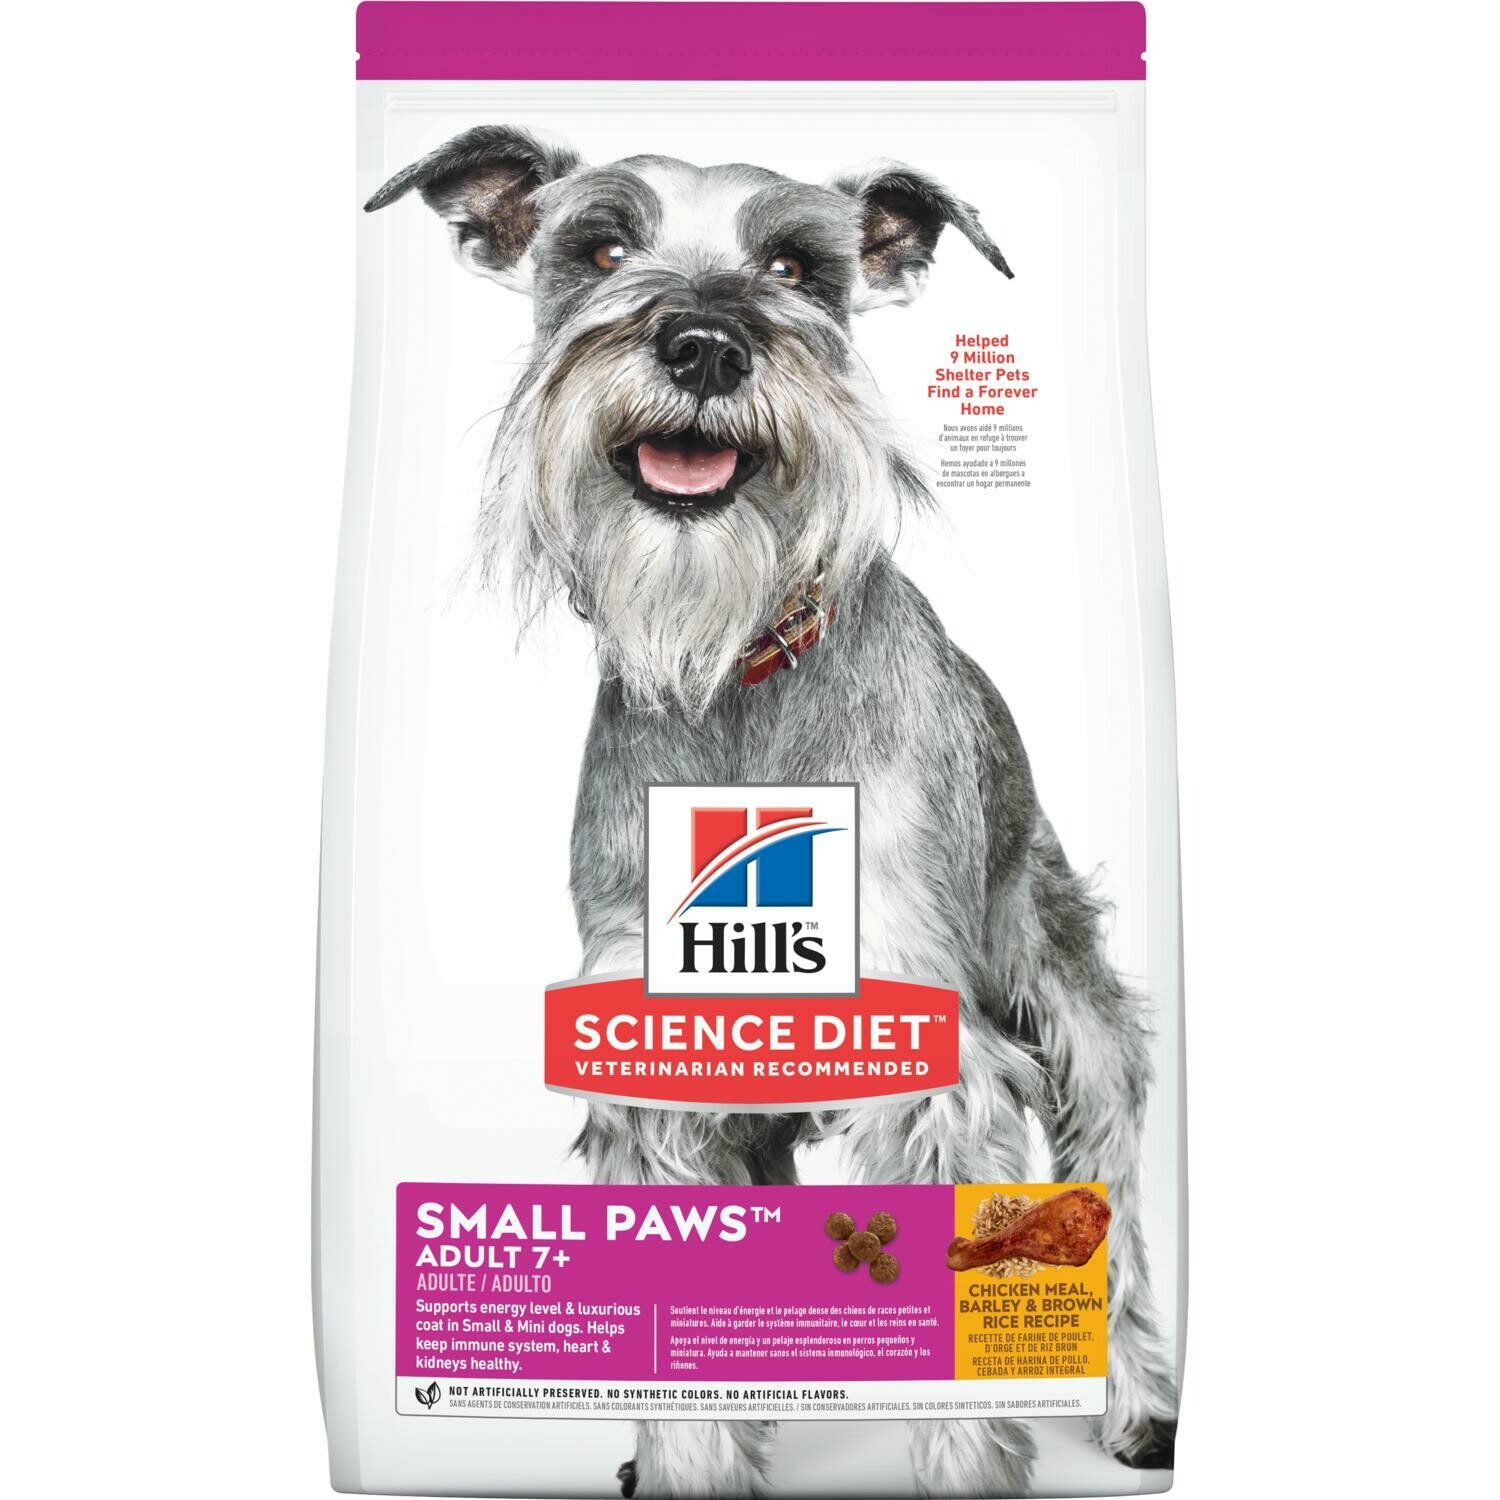 SCIENCE DIET CHICKEN ADULT 7+ SMALL PAWS 4.5#